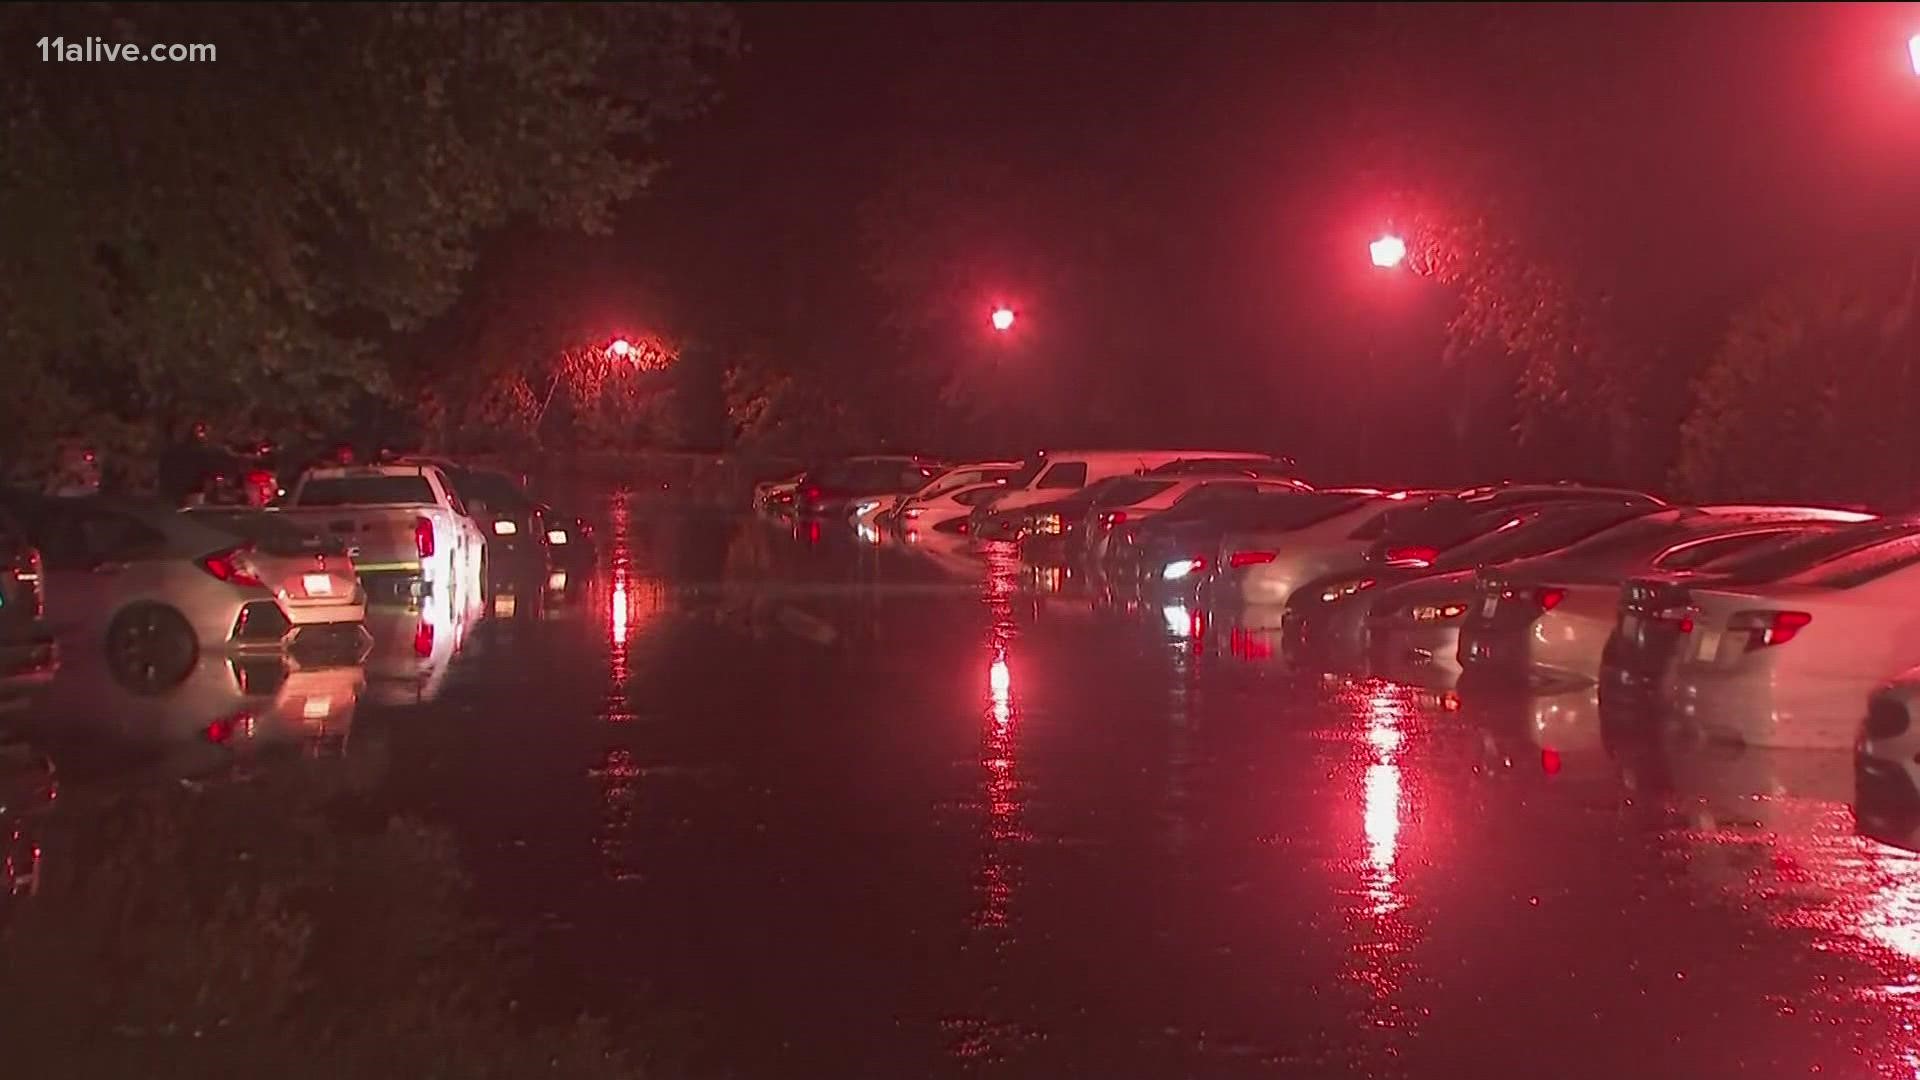 Several roads, cars and homes were flooded as storms moved through the area overnight.